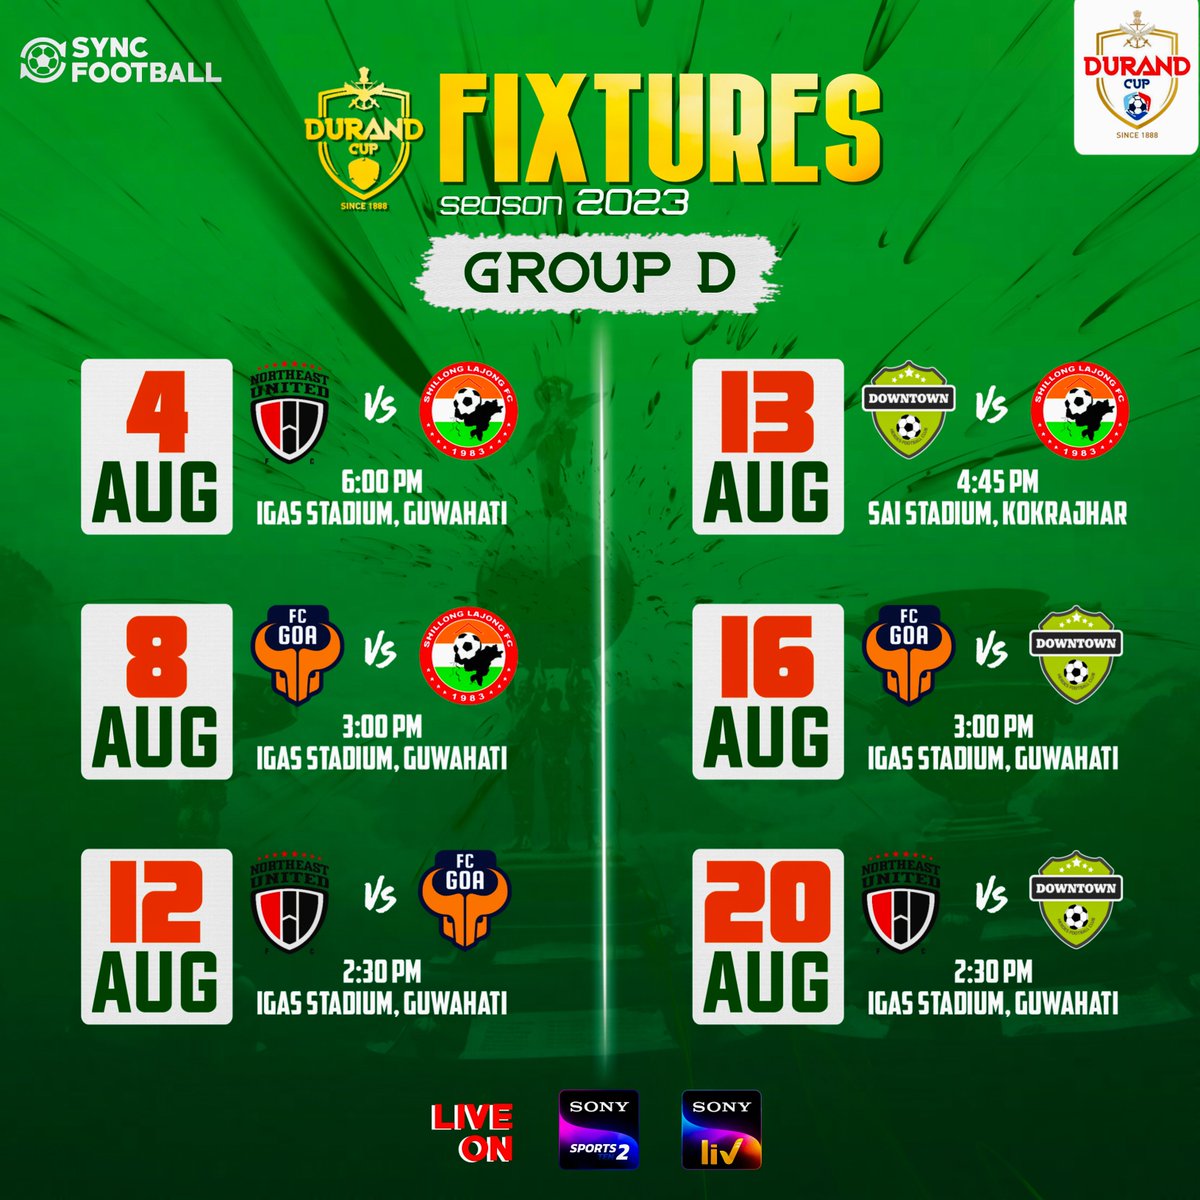 Durand Cup 2023 | FIXTURES 💥

TV Broadcasting - Sony Sports 2
OTT Streaming - SonyLIV

#durandcup #heroisl #heroileague #indianfootball #football #syncftbl